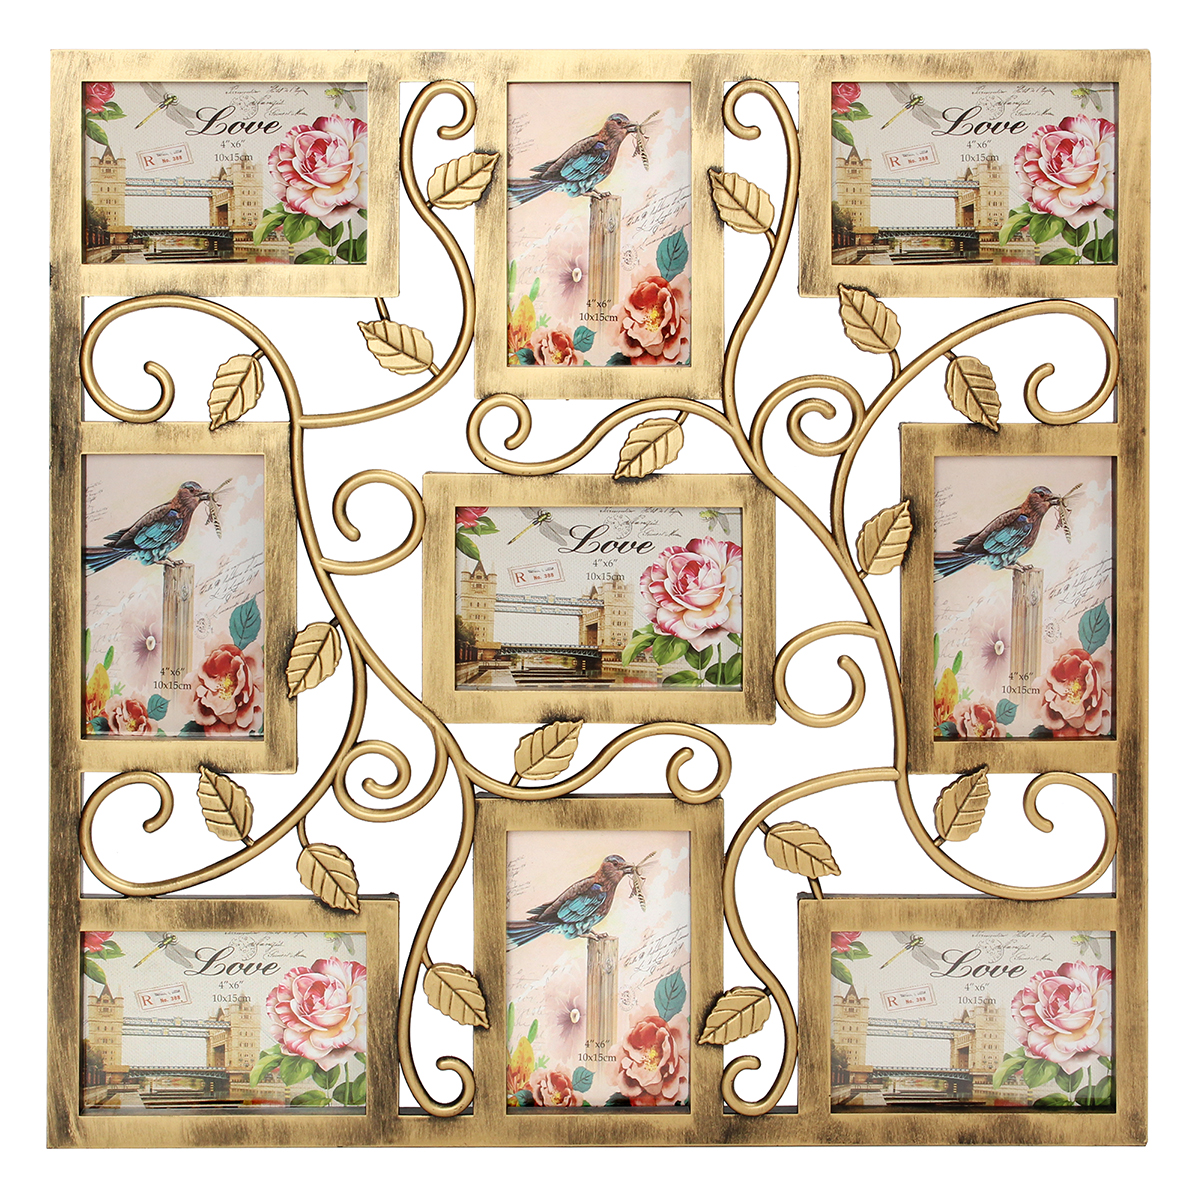 Bronze Floral Wall Hanging Collage Photo Frames Picture Display Decor Gift 6X4